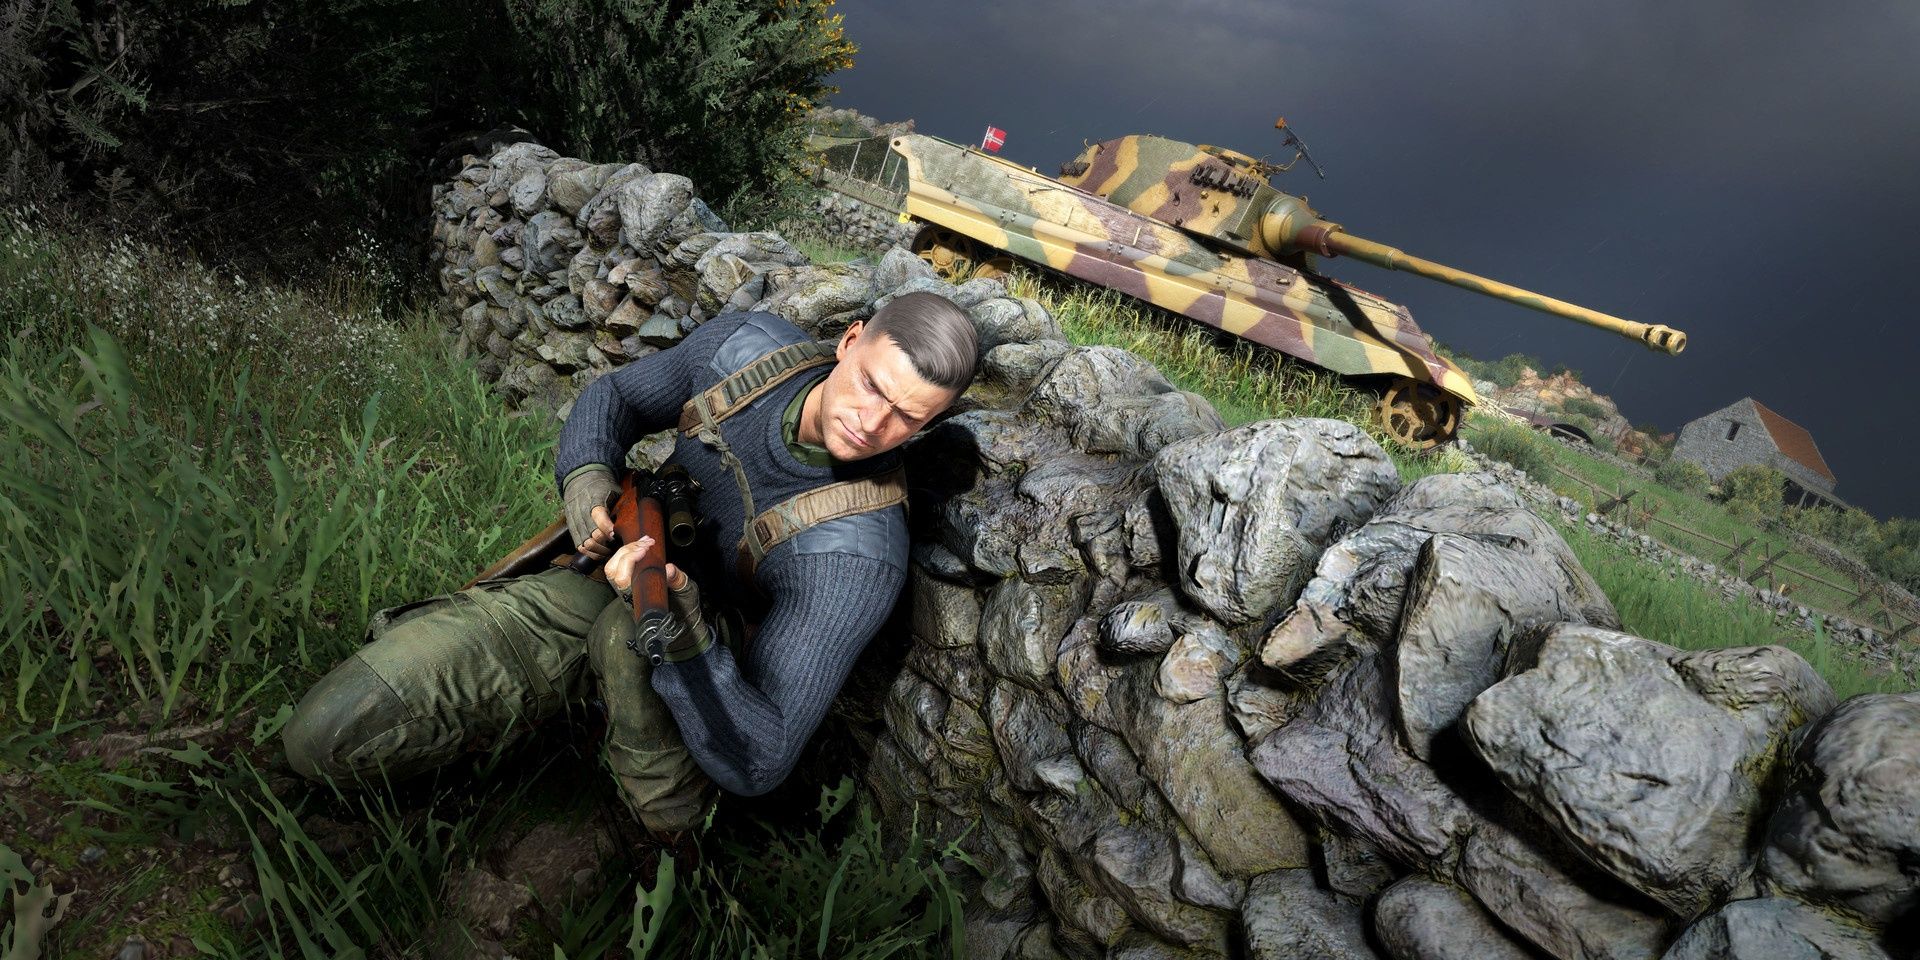 A screenshot showing Karl hiding from an enemy tank in Sniper Elite 5